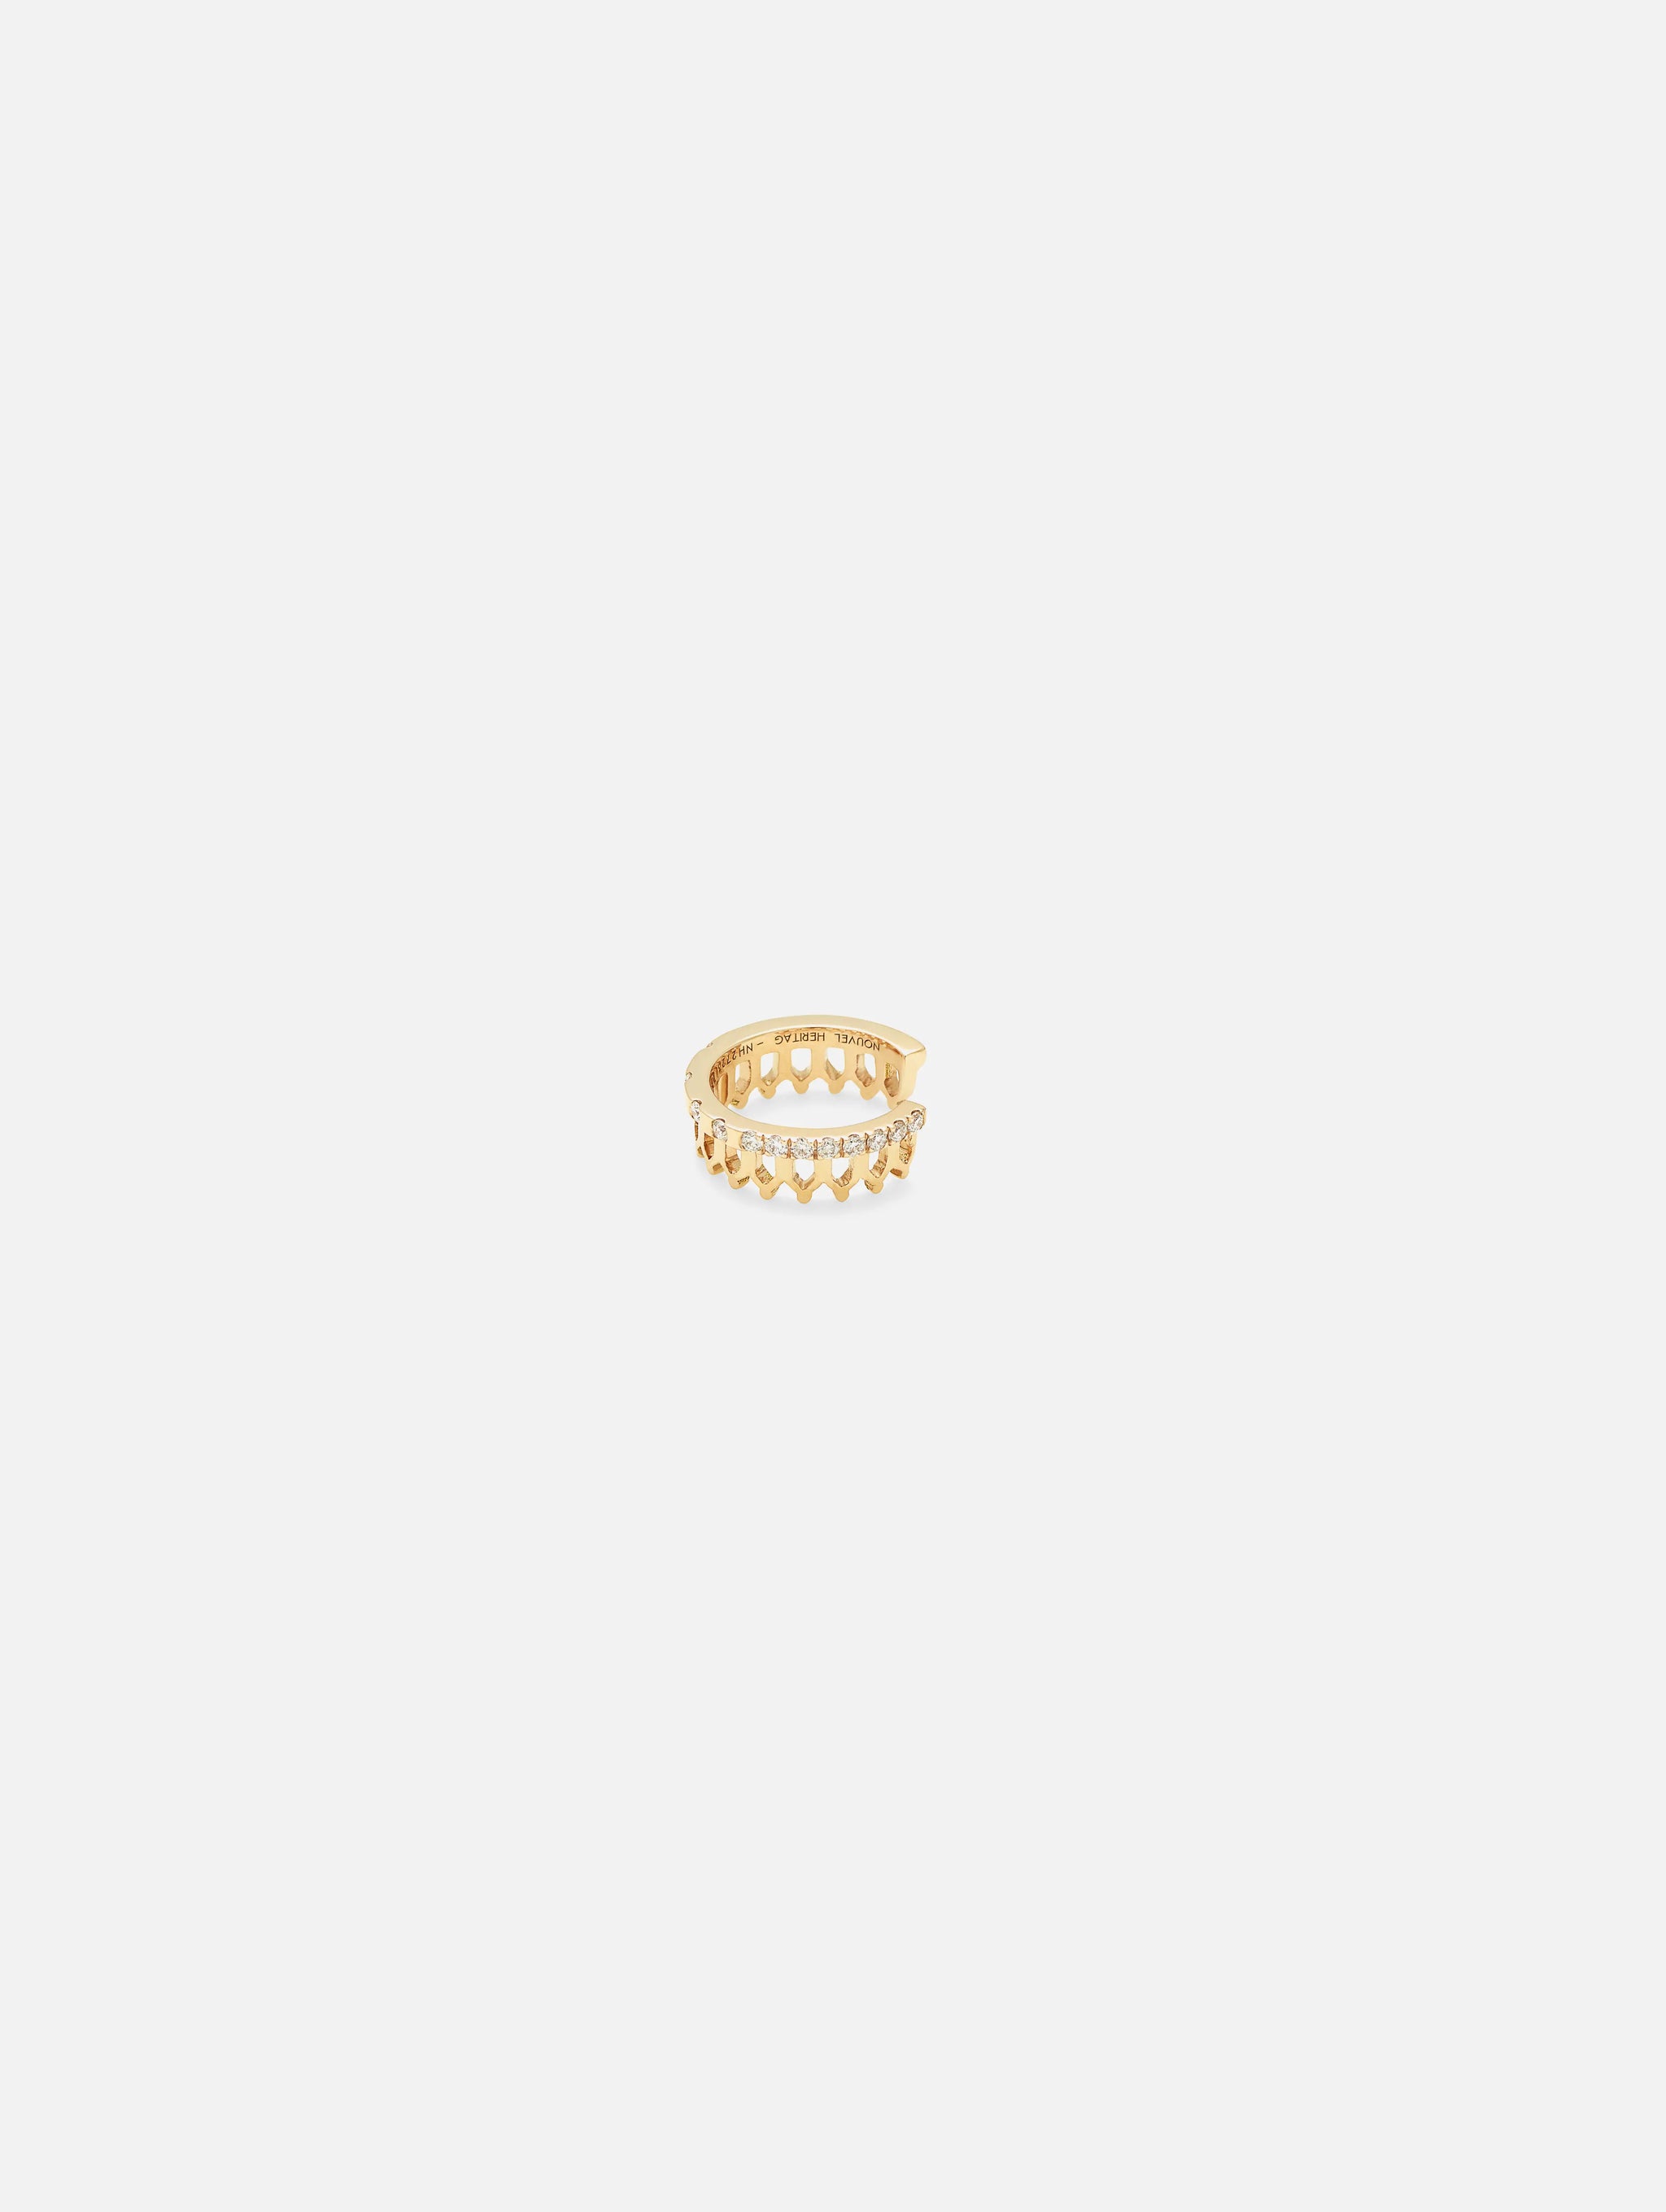 Simple Some Diamond Ear Cuff in Yellow Gold - 1 - Nouvel Heritage